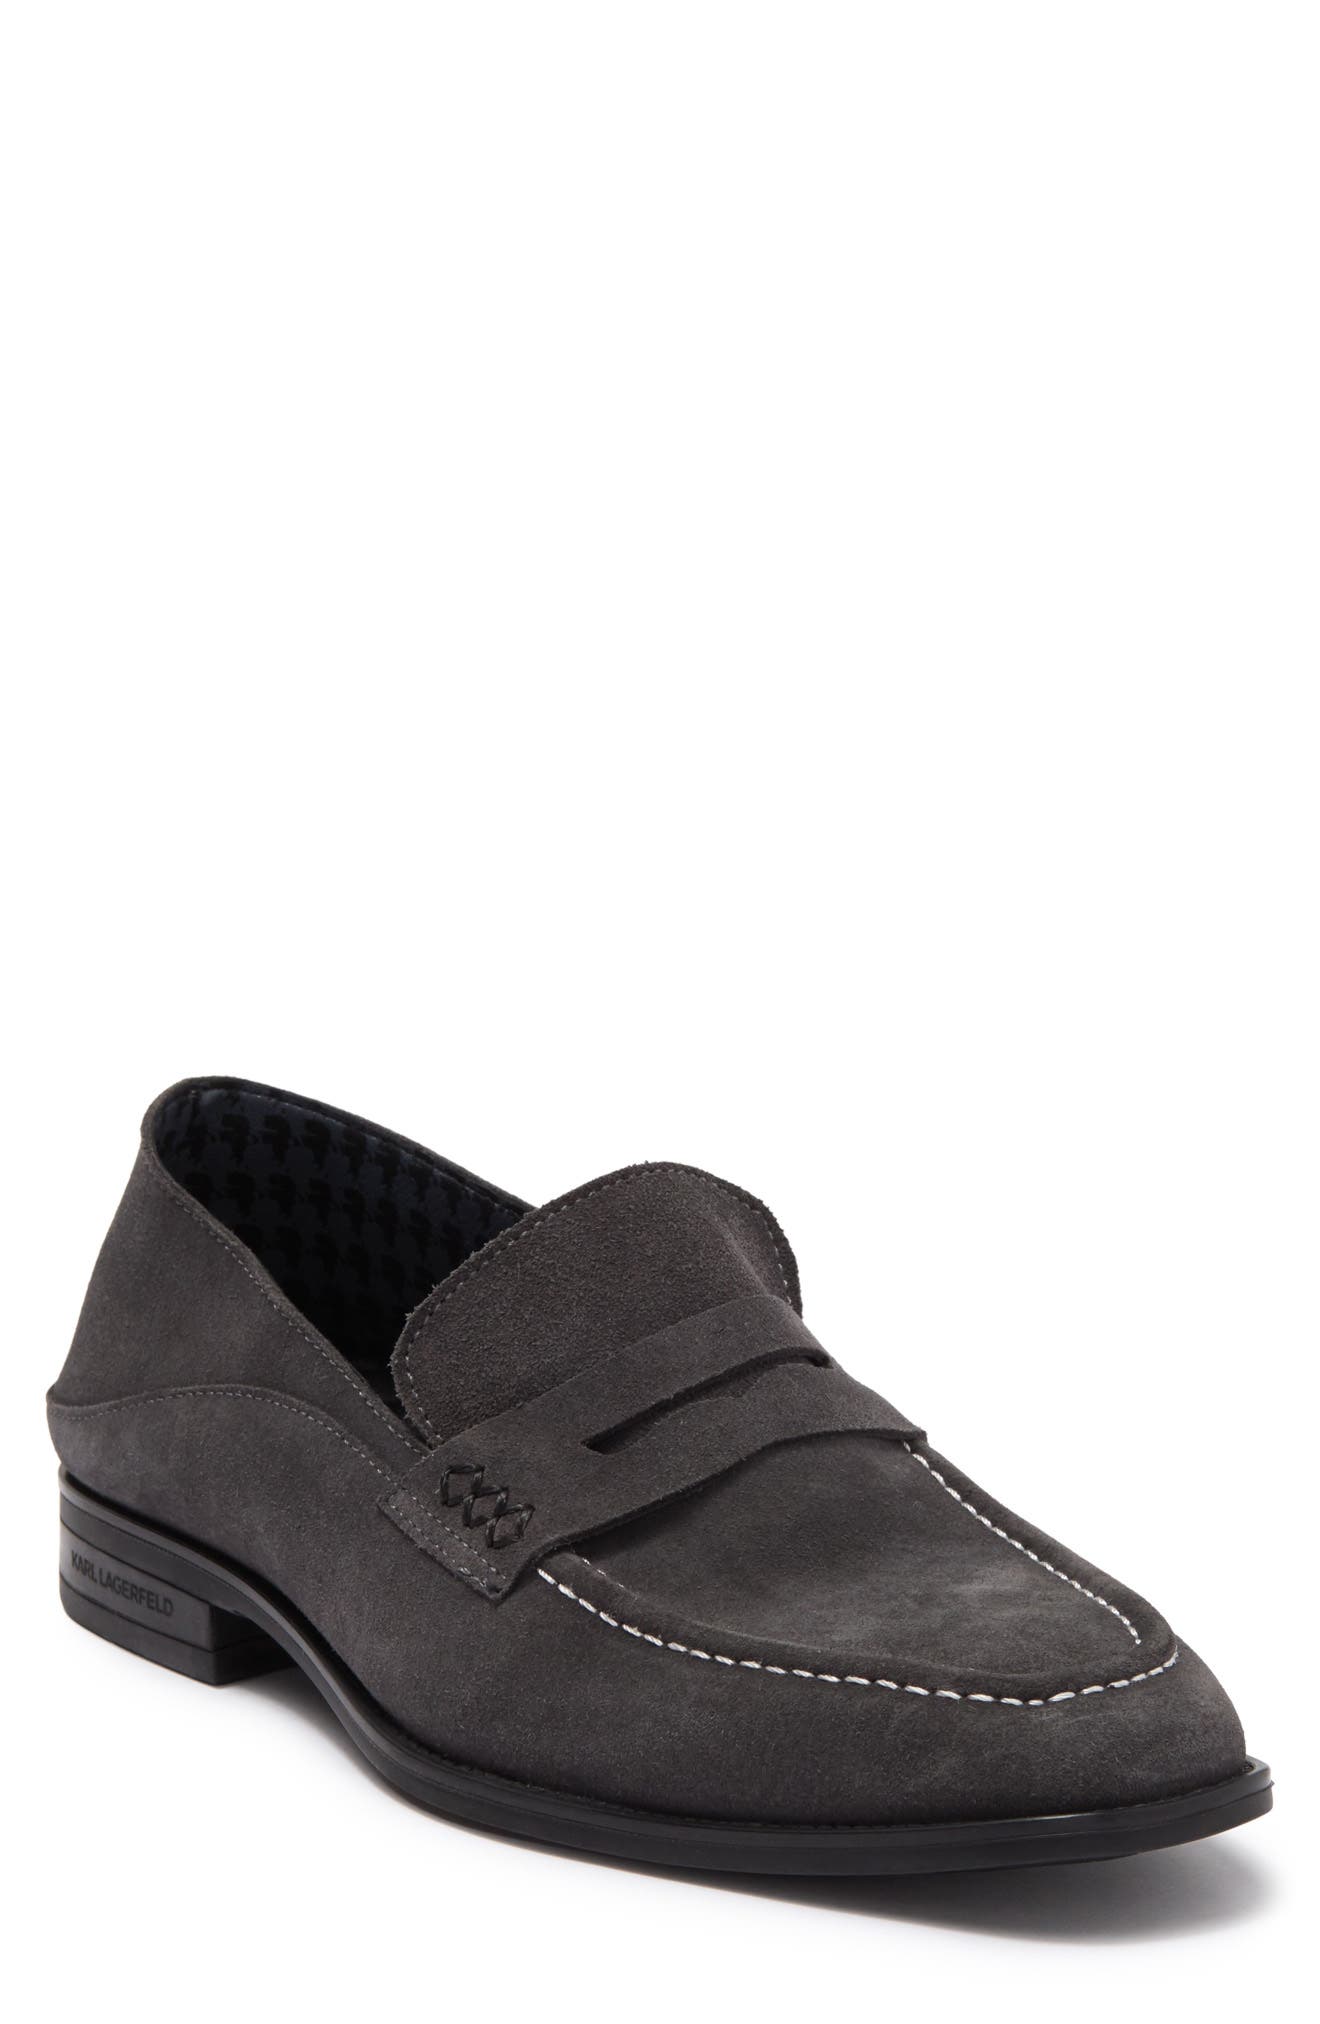 Karl Lagerfeld Suede Penny Loafer In Light/pastel Grey5